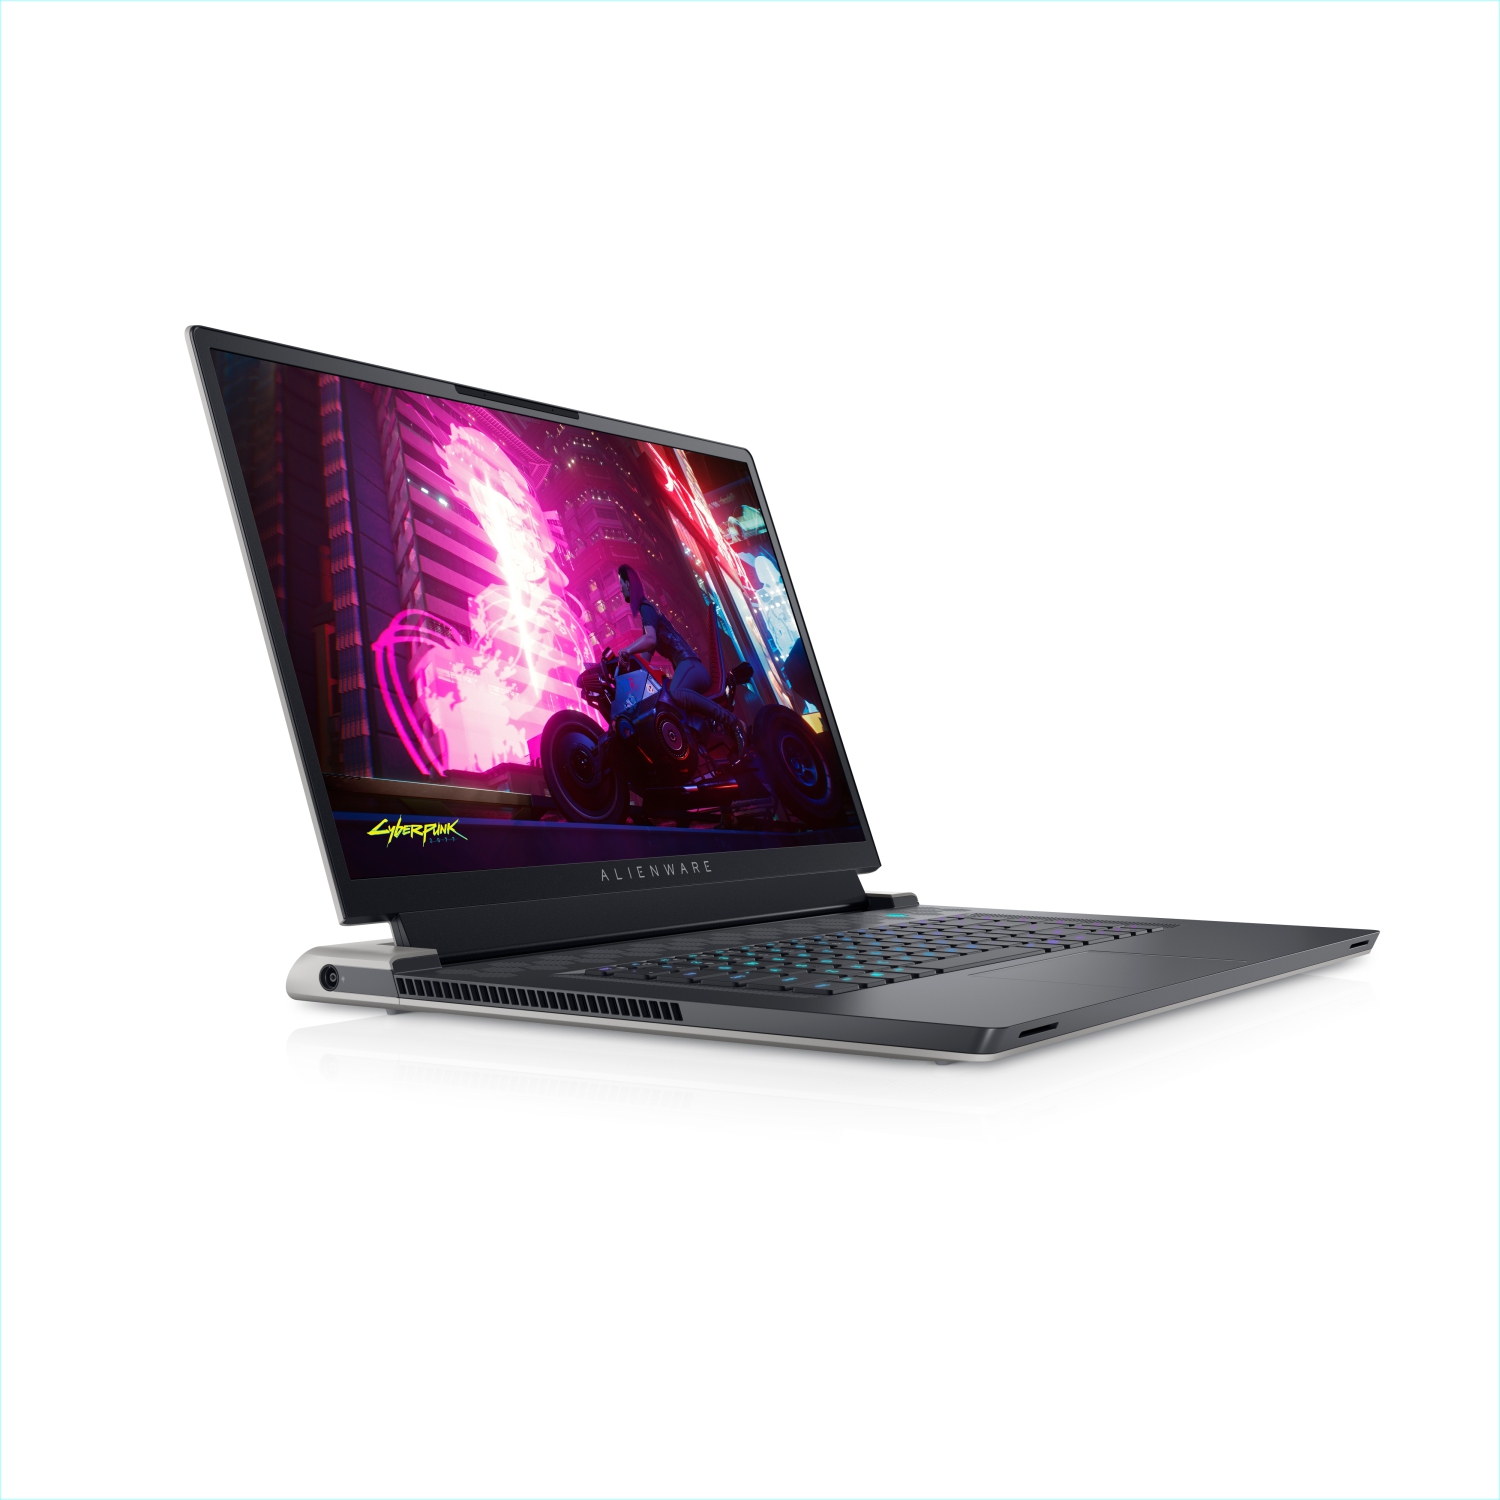 Refurbished (Excellent) - Dell Alienware X17 R1 Gaming Laptop (2021), 17.3" FHD, Core i7, 256GB SSD, 32GB RAM, RTX 3080, 8 Cores @ 4.6 GHz, 11th Gen CPU Certified